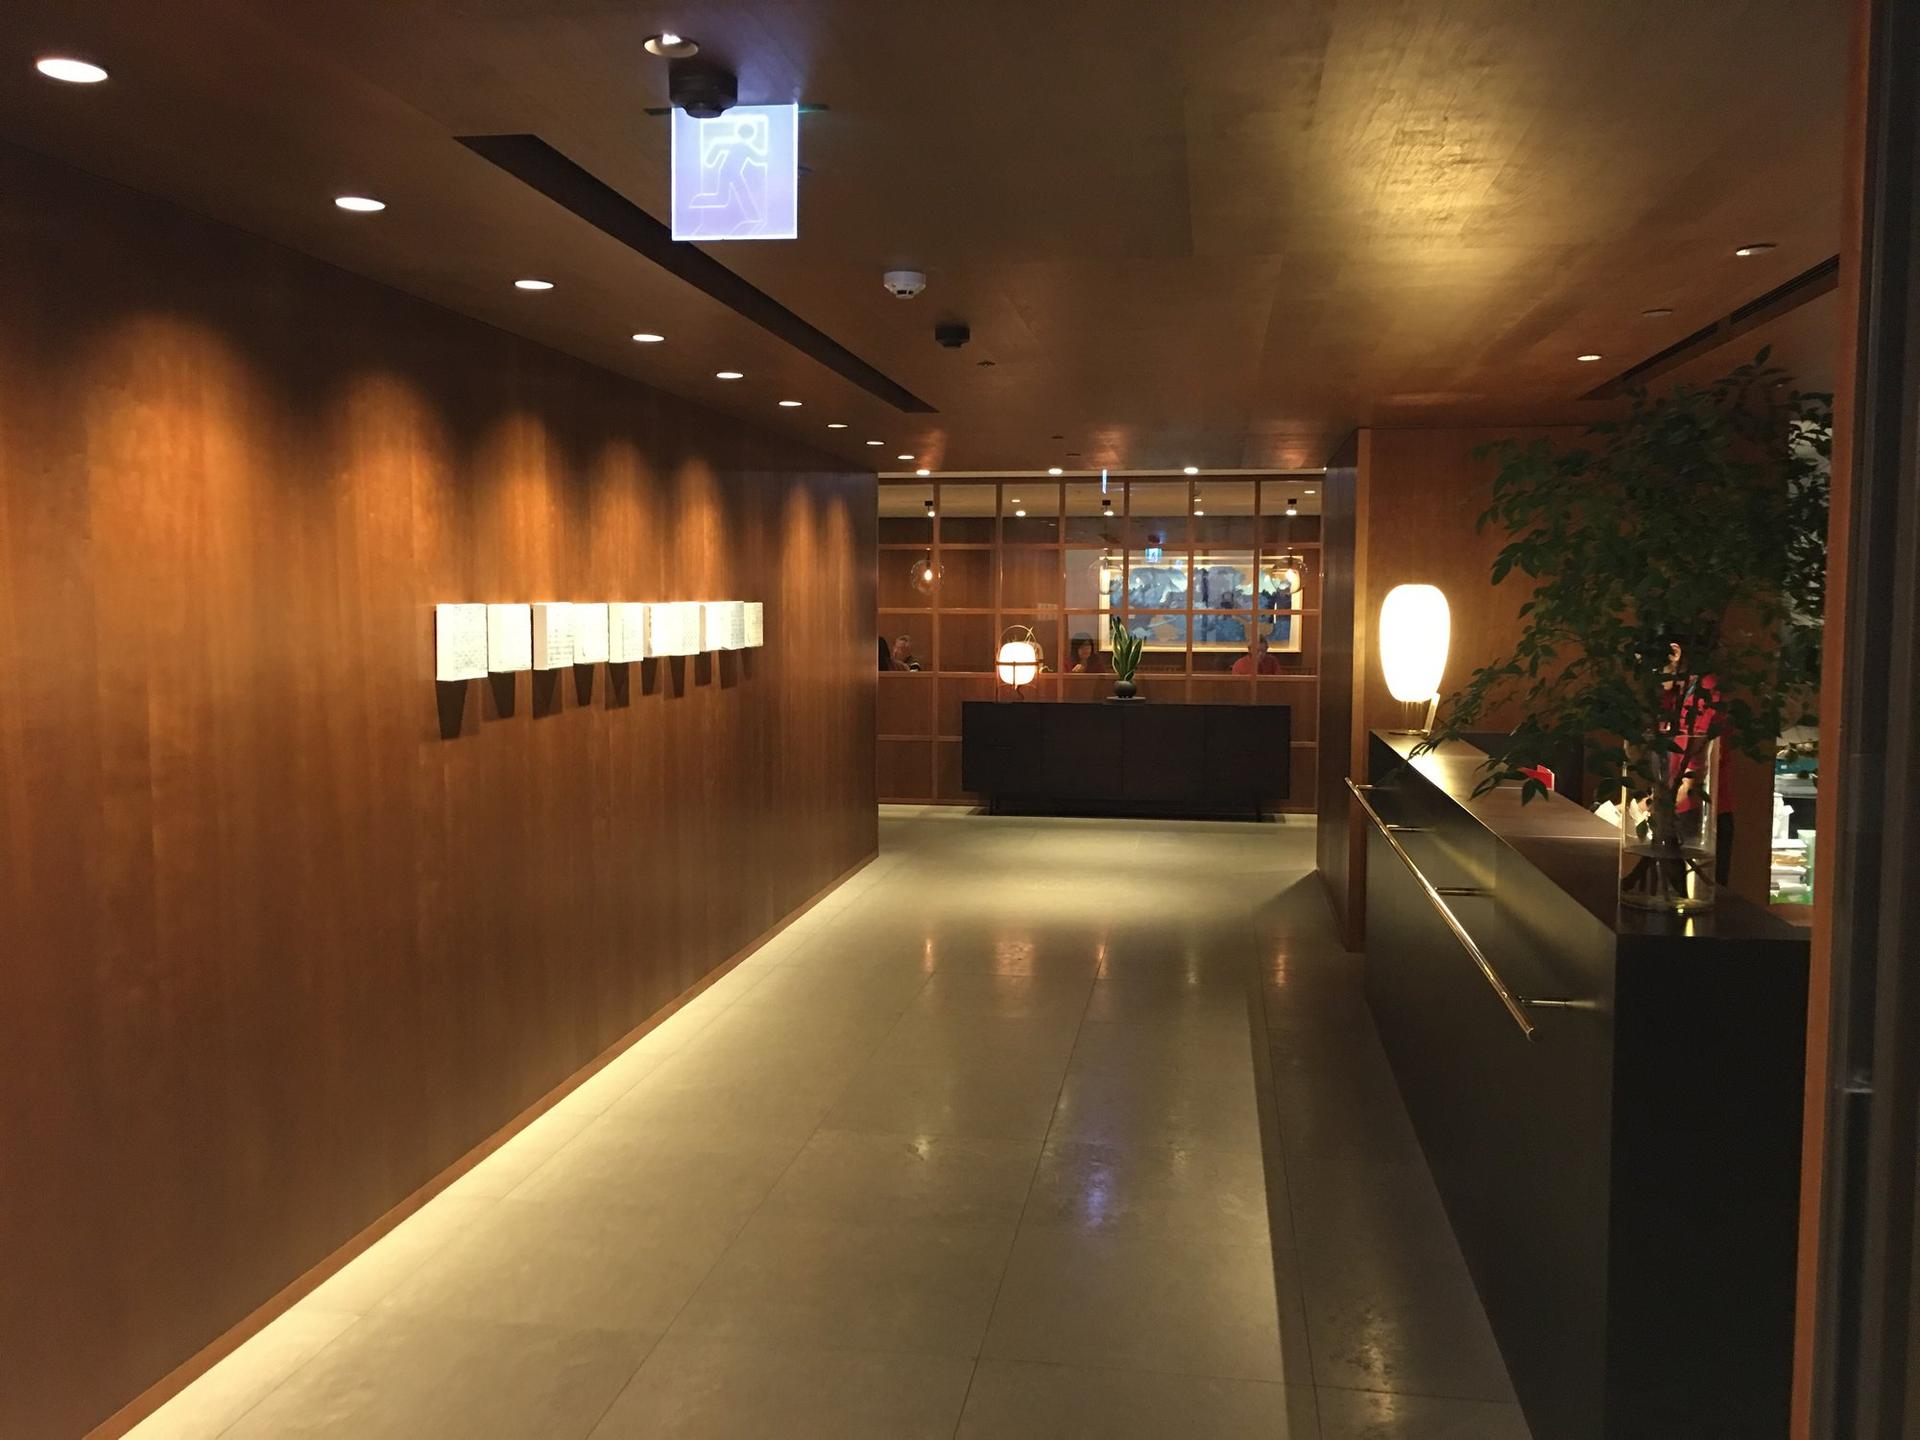 Cathay Pacific Lounge image 26 of 37